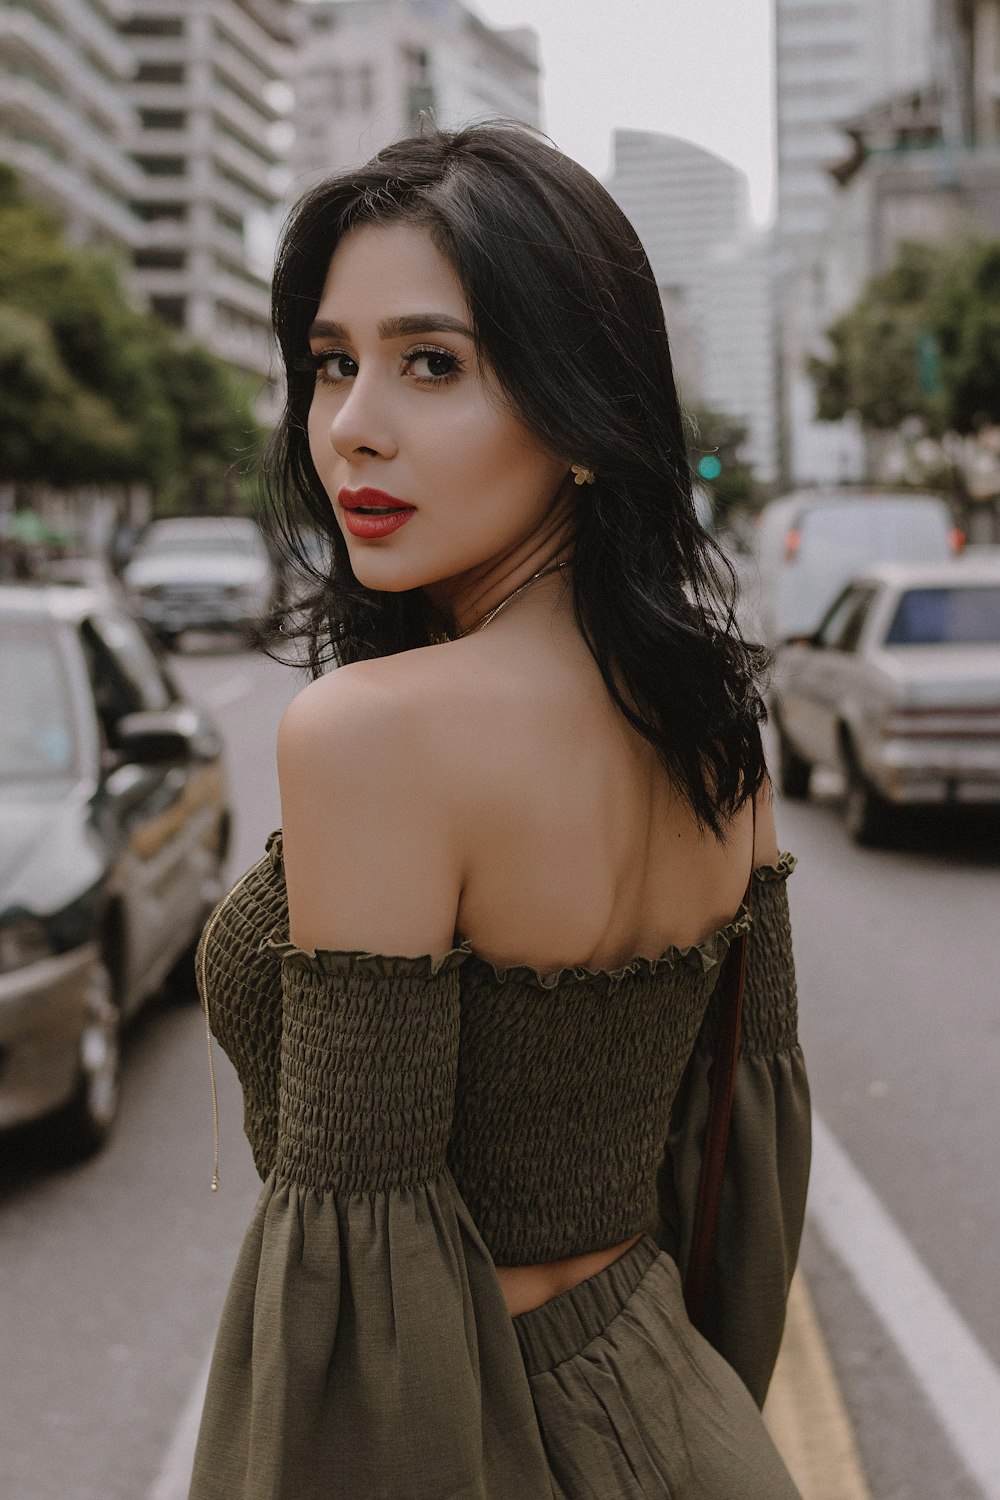 Woman in Black Off Shoulder Top · Free Stock Photo